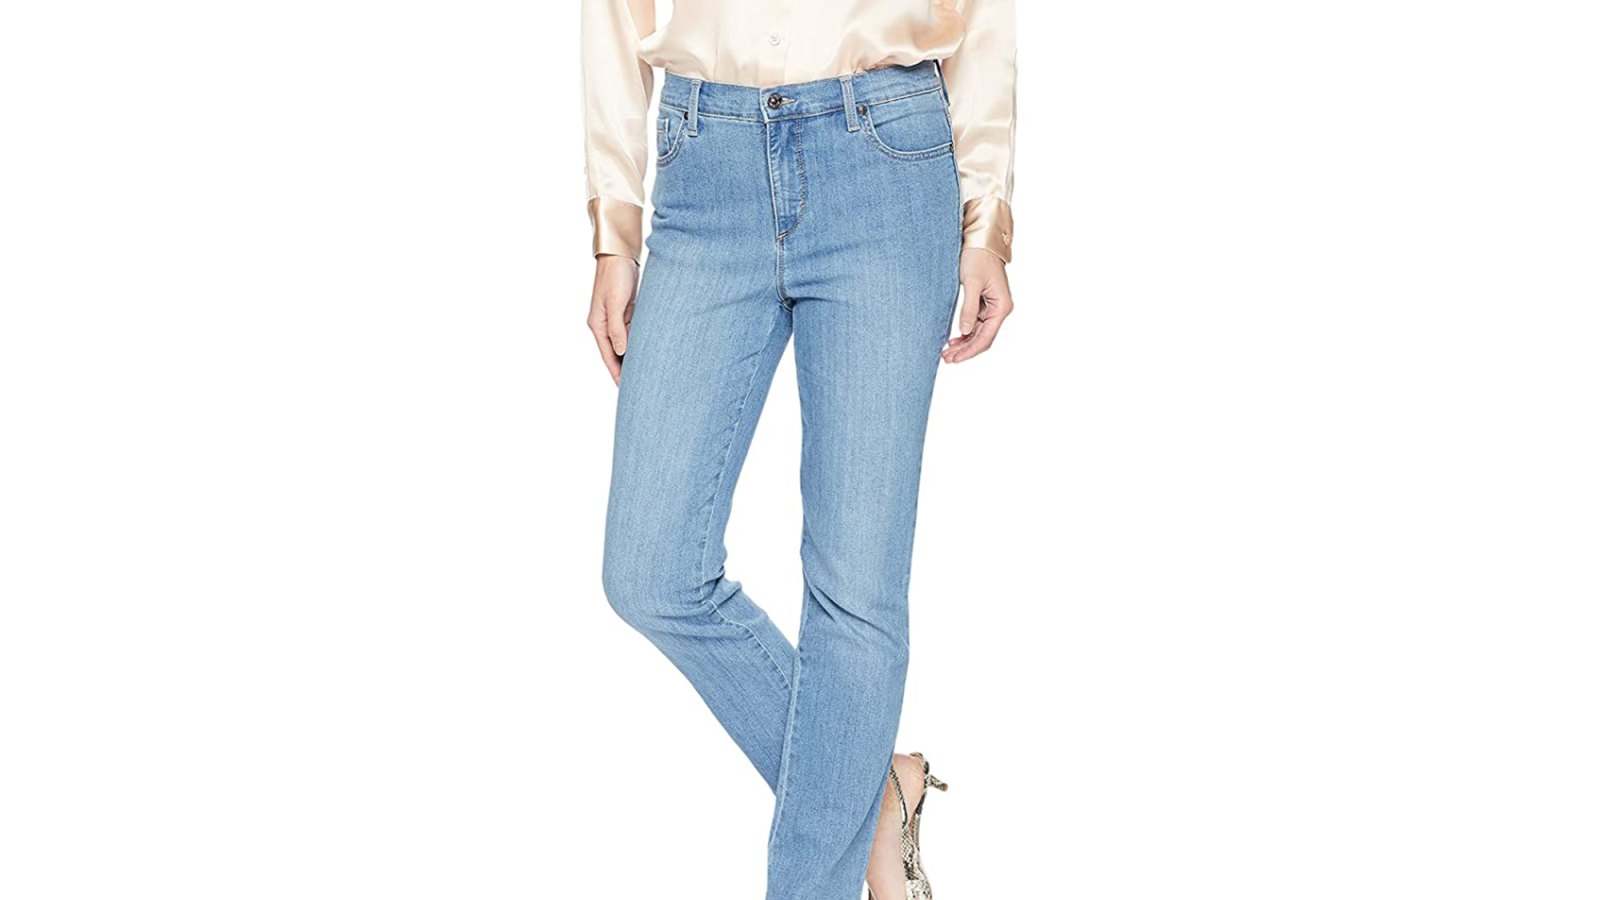 Gloria Vanderbilt Stylish Mom Jeans Have Such a Lovely Fit | Us Weekly